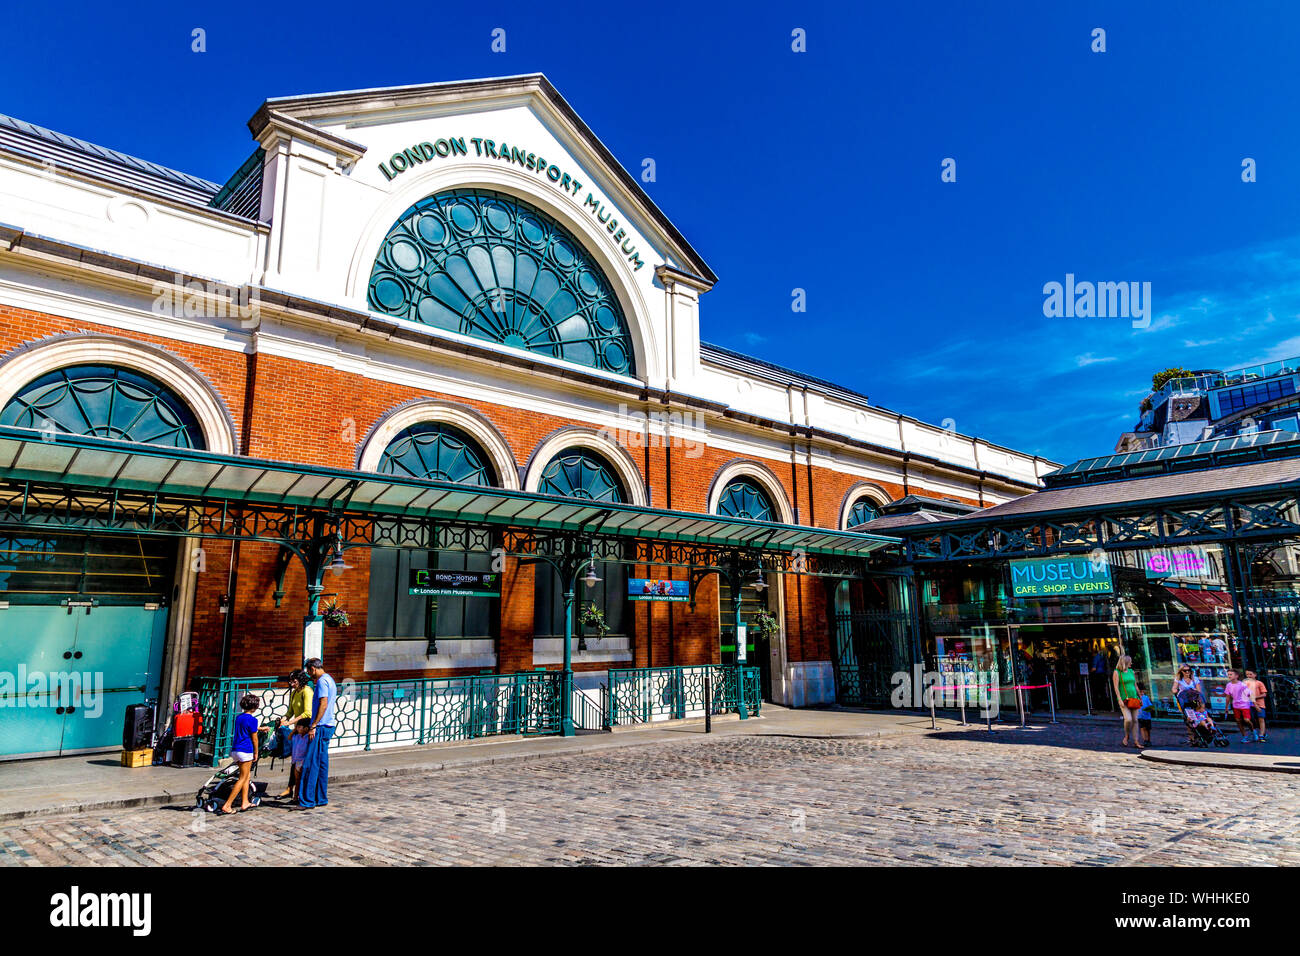 Exterior of London Transport Museum in the former Victorian market building, Covent Garden, London, UK Stock Photo